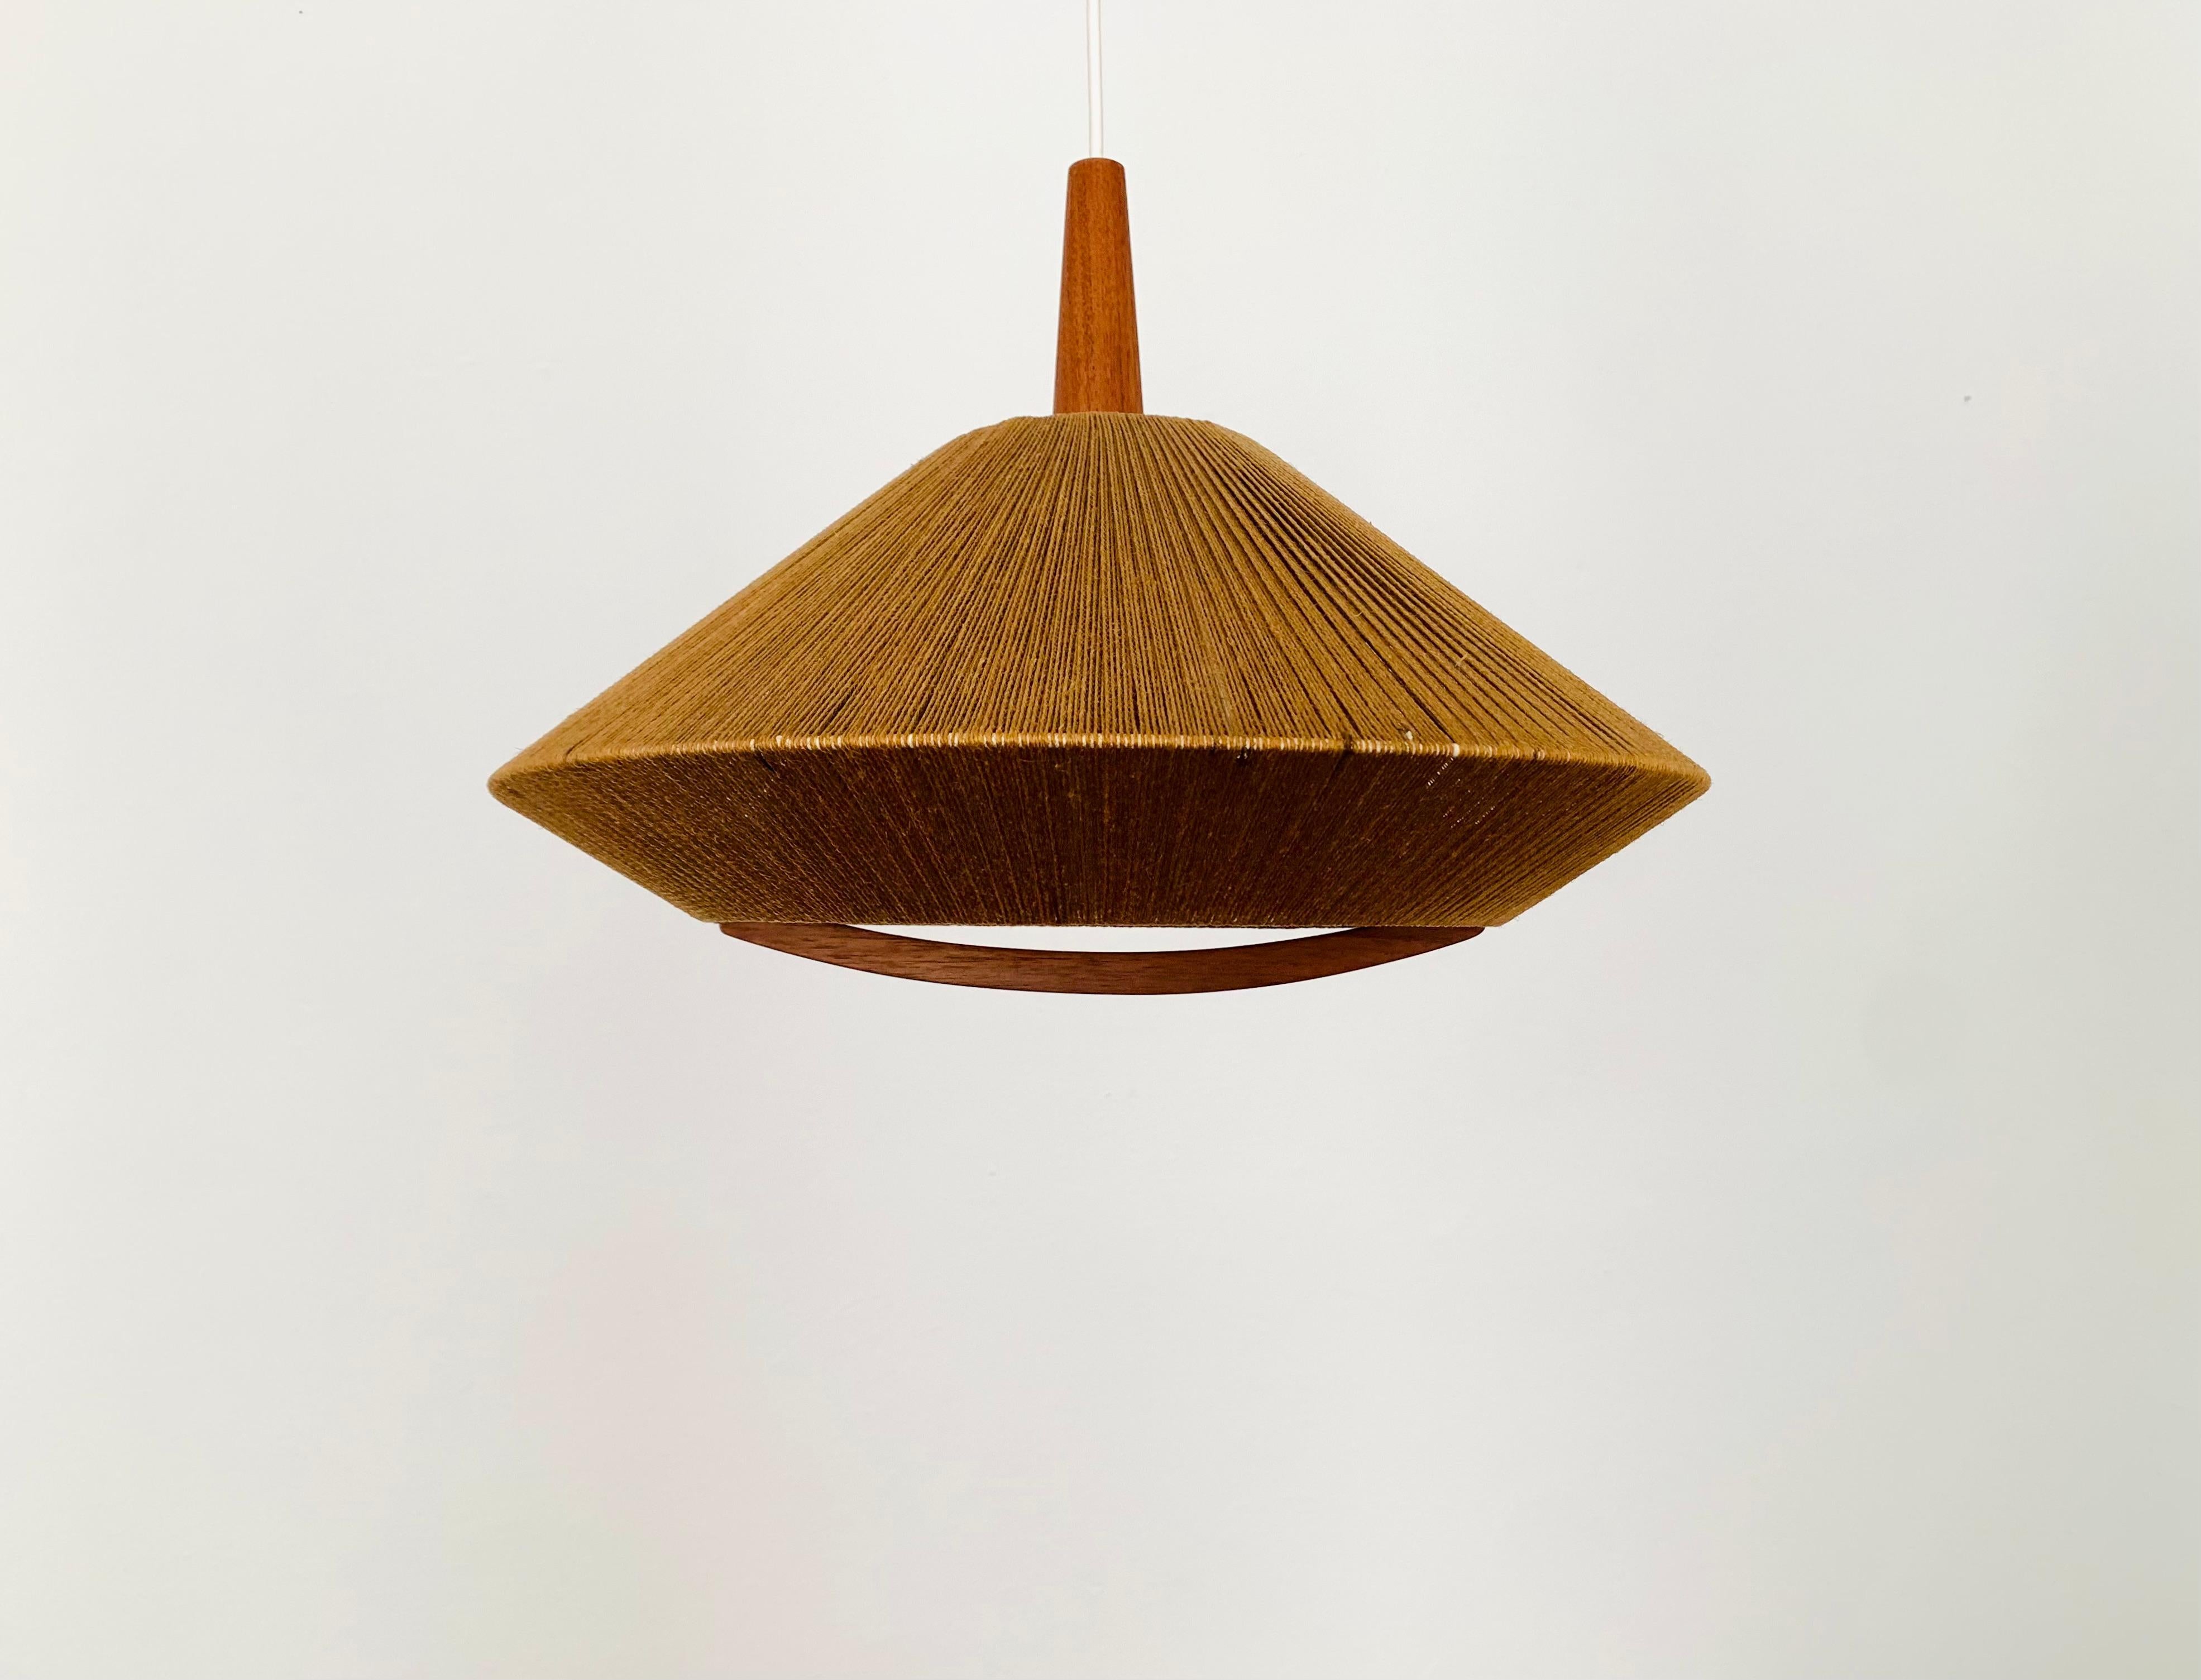 Beautiful raffia lamp from the 1960s.
Great and unusual design with a fantastically comfortable look.
Very nice teak details and high-quality workmanship.
A spectacular play of light is created.

Manufacturer: Temde

Condition:

Very good